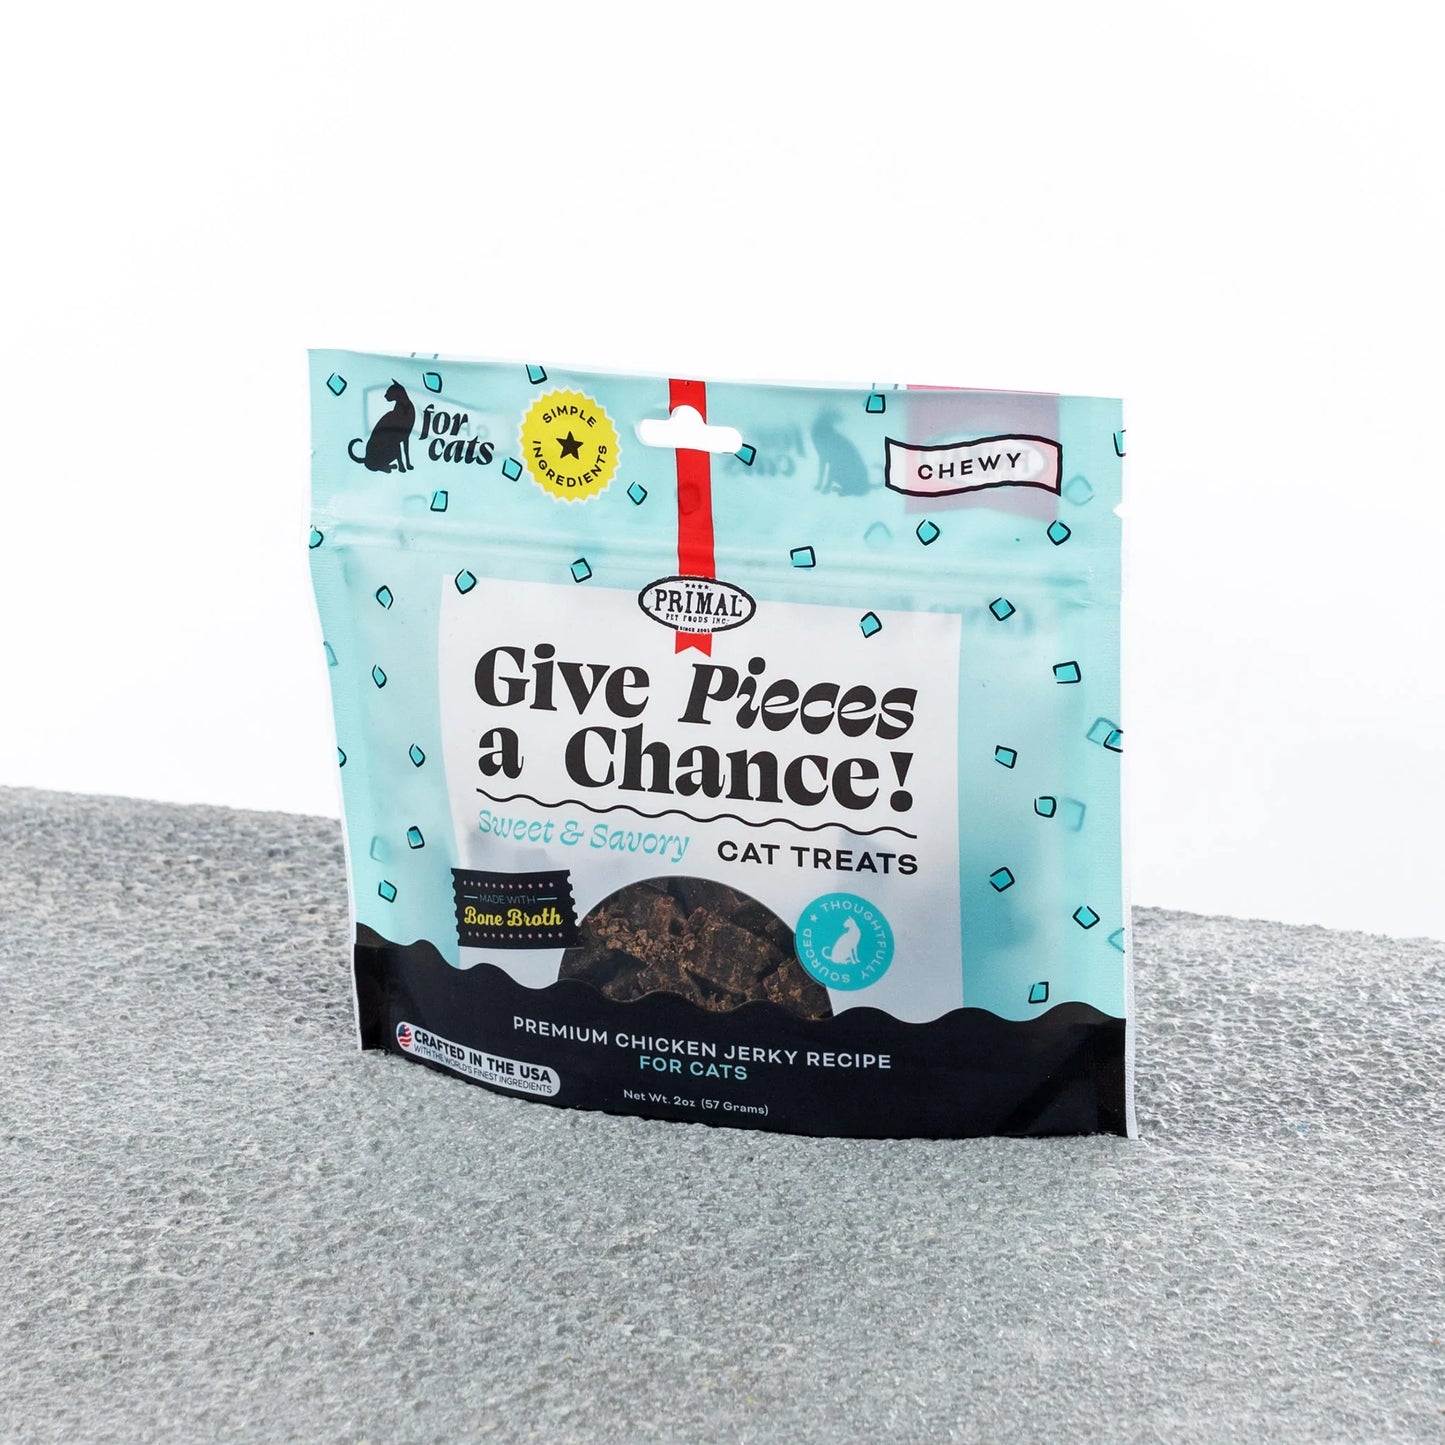 Primal Give Pieces A Chance Chicken Jerky 4-oz, Cat Treat